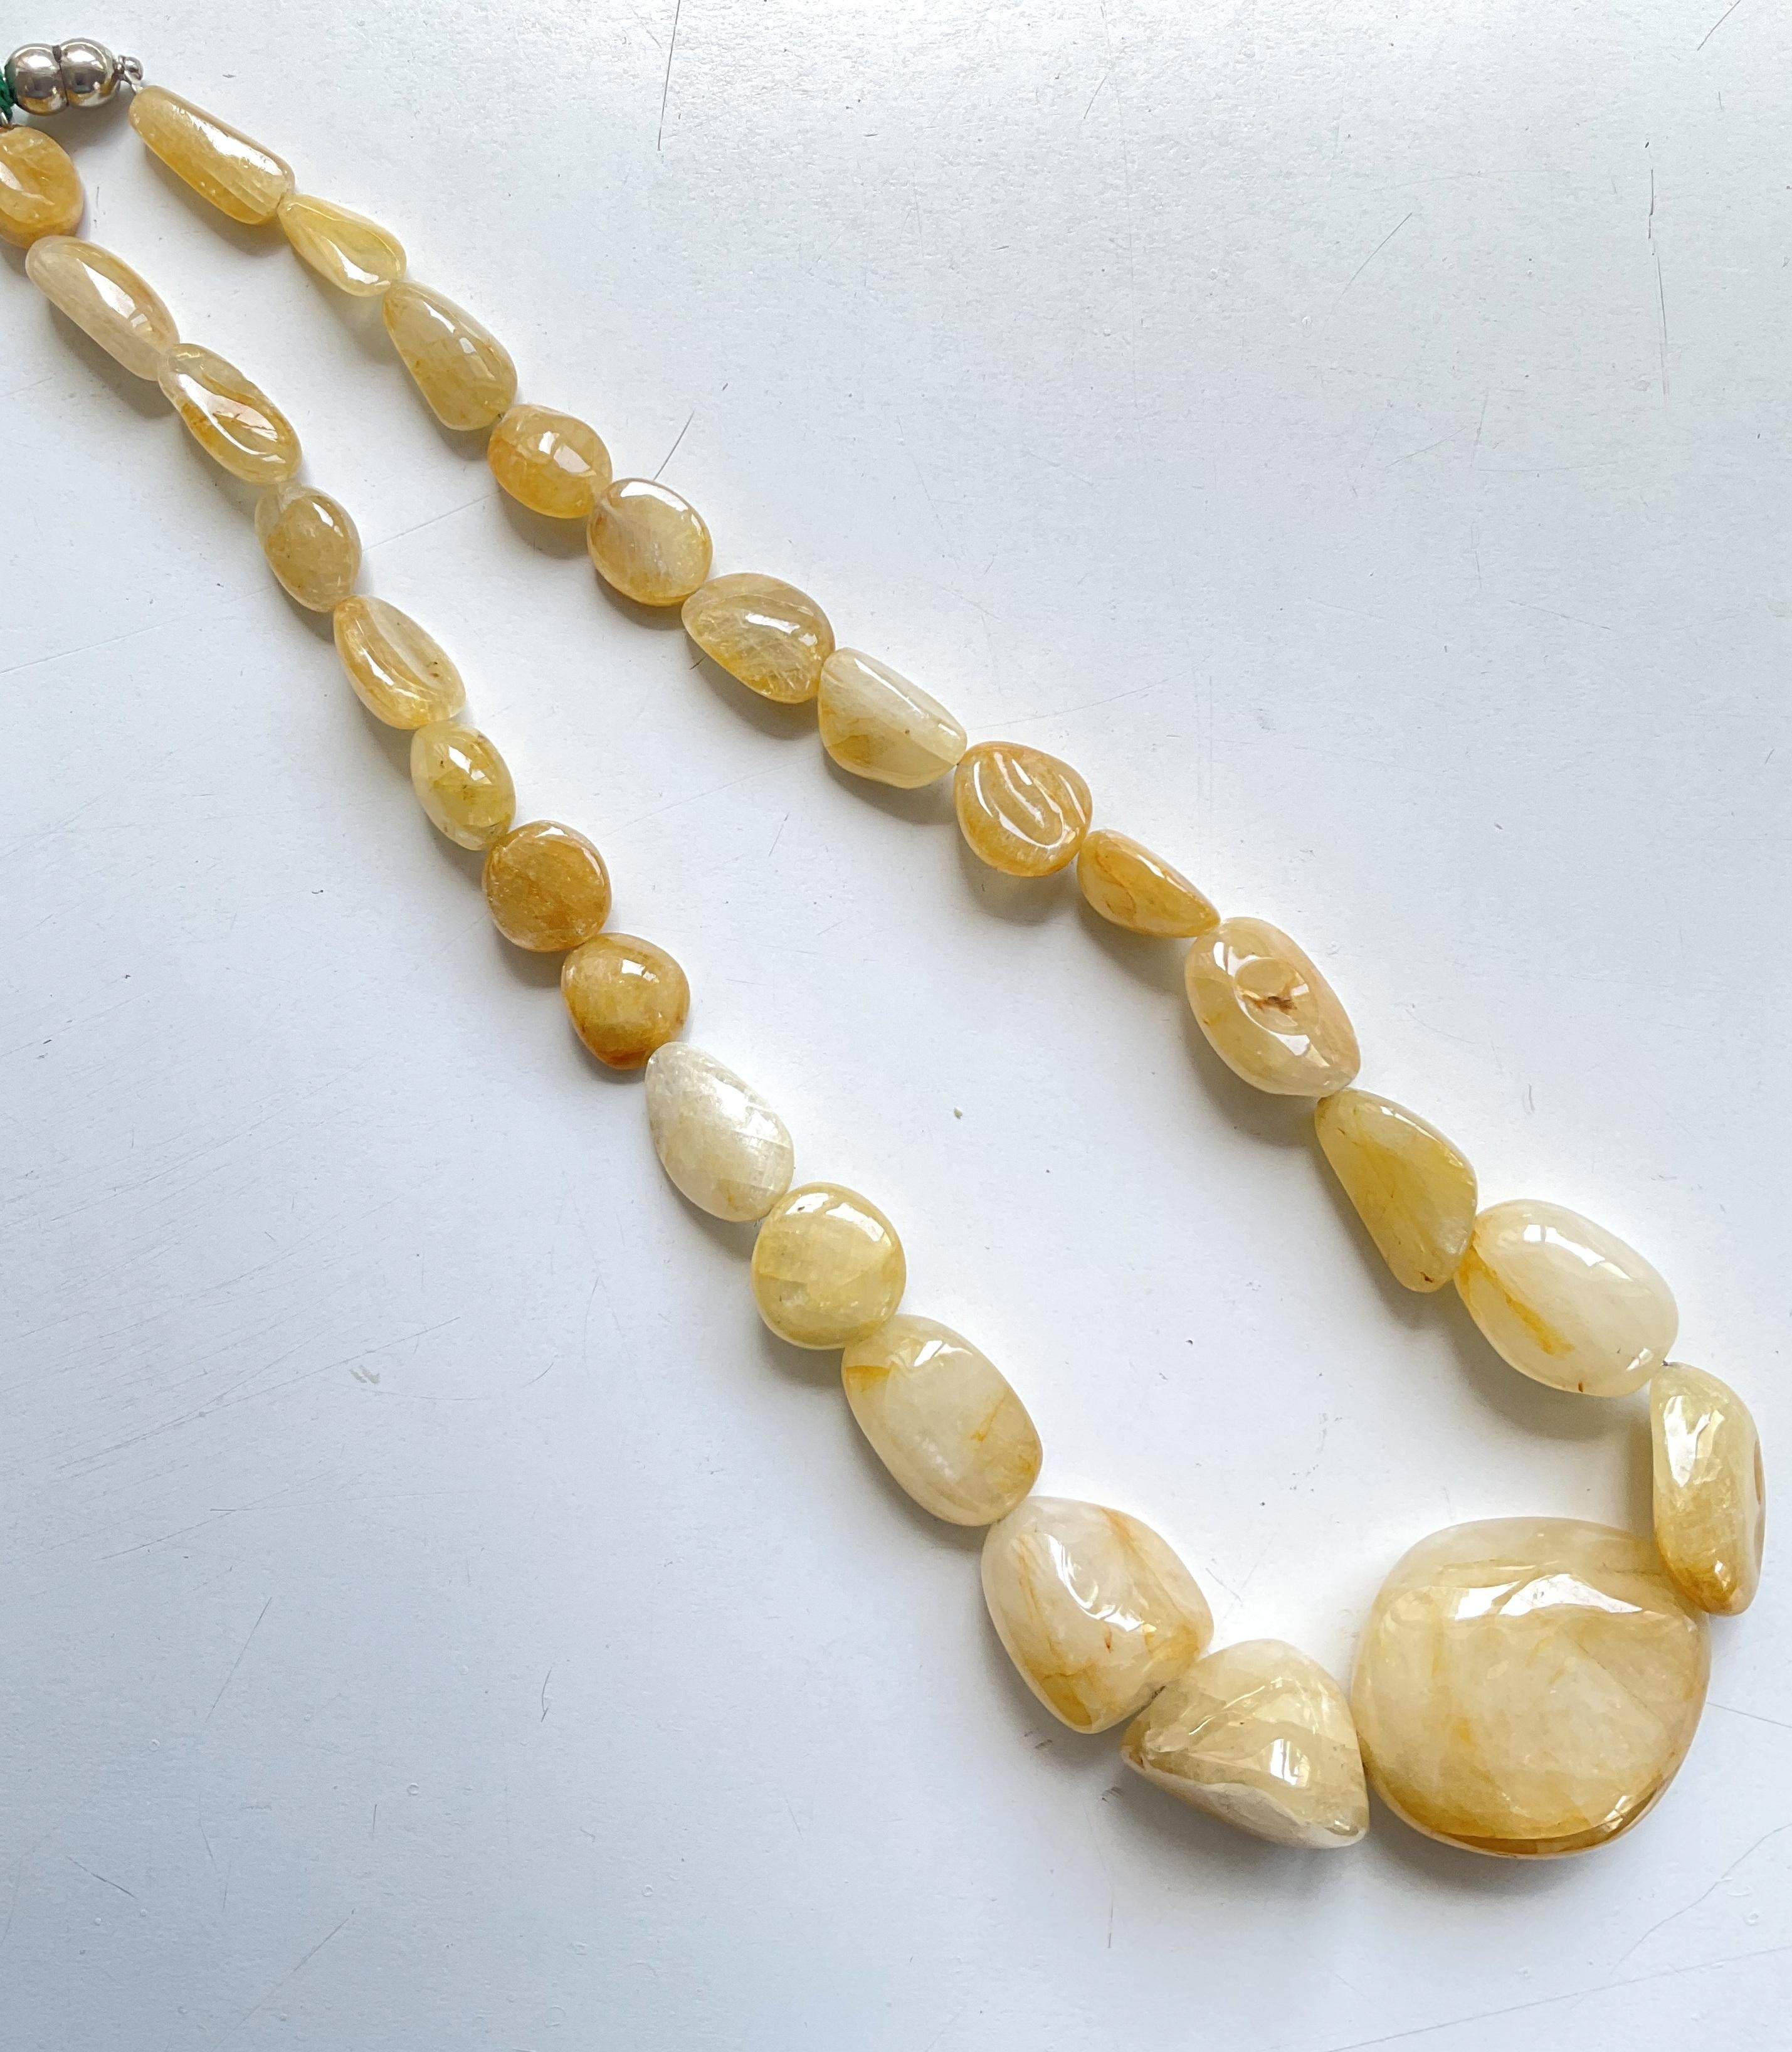 Art Deco 1111.20 Carats Big Size Yellow Sapphire Plain Tumbled Natural Gemstone Necklace For Sale